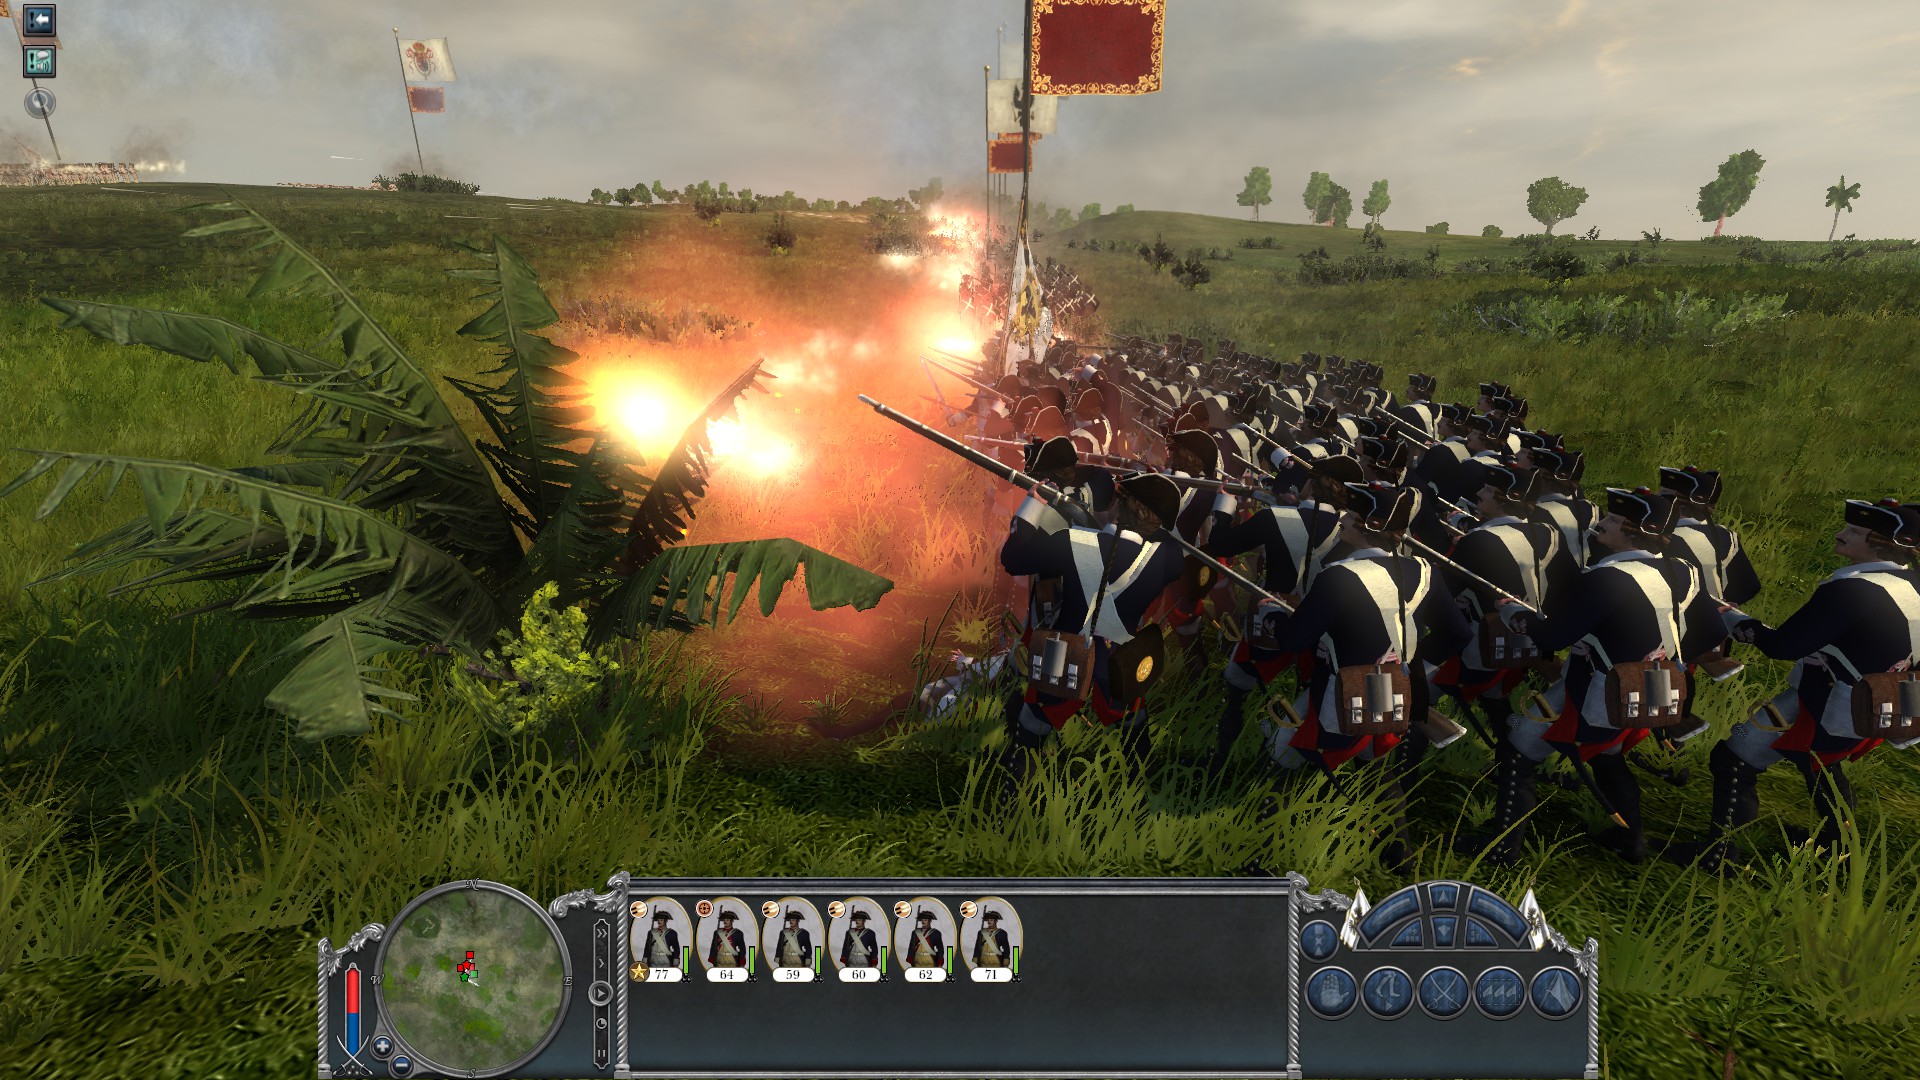 android total war attila images